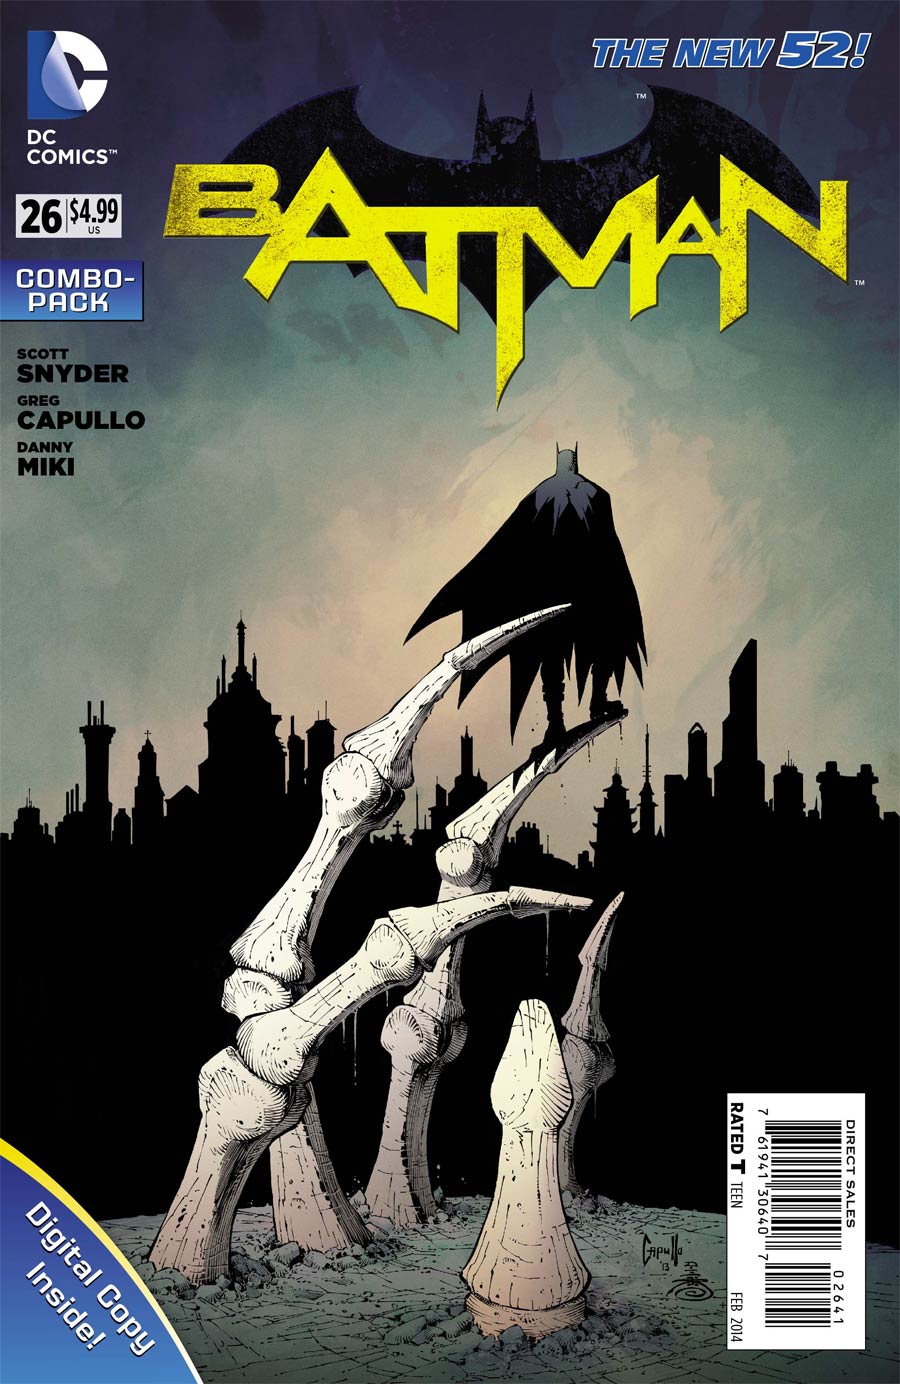 Batman Vol 2 #26 Cover C Combo Pack Without Polybag (Zero Year Tie-In)